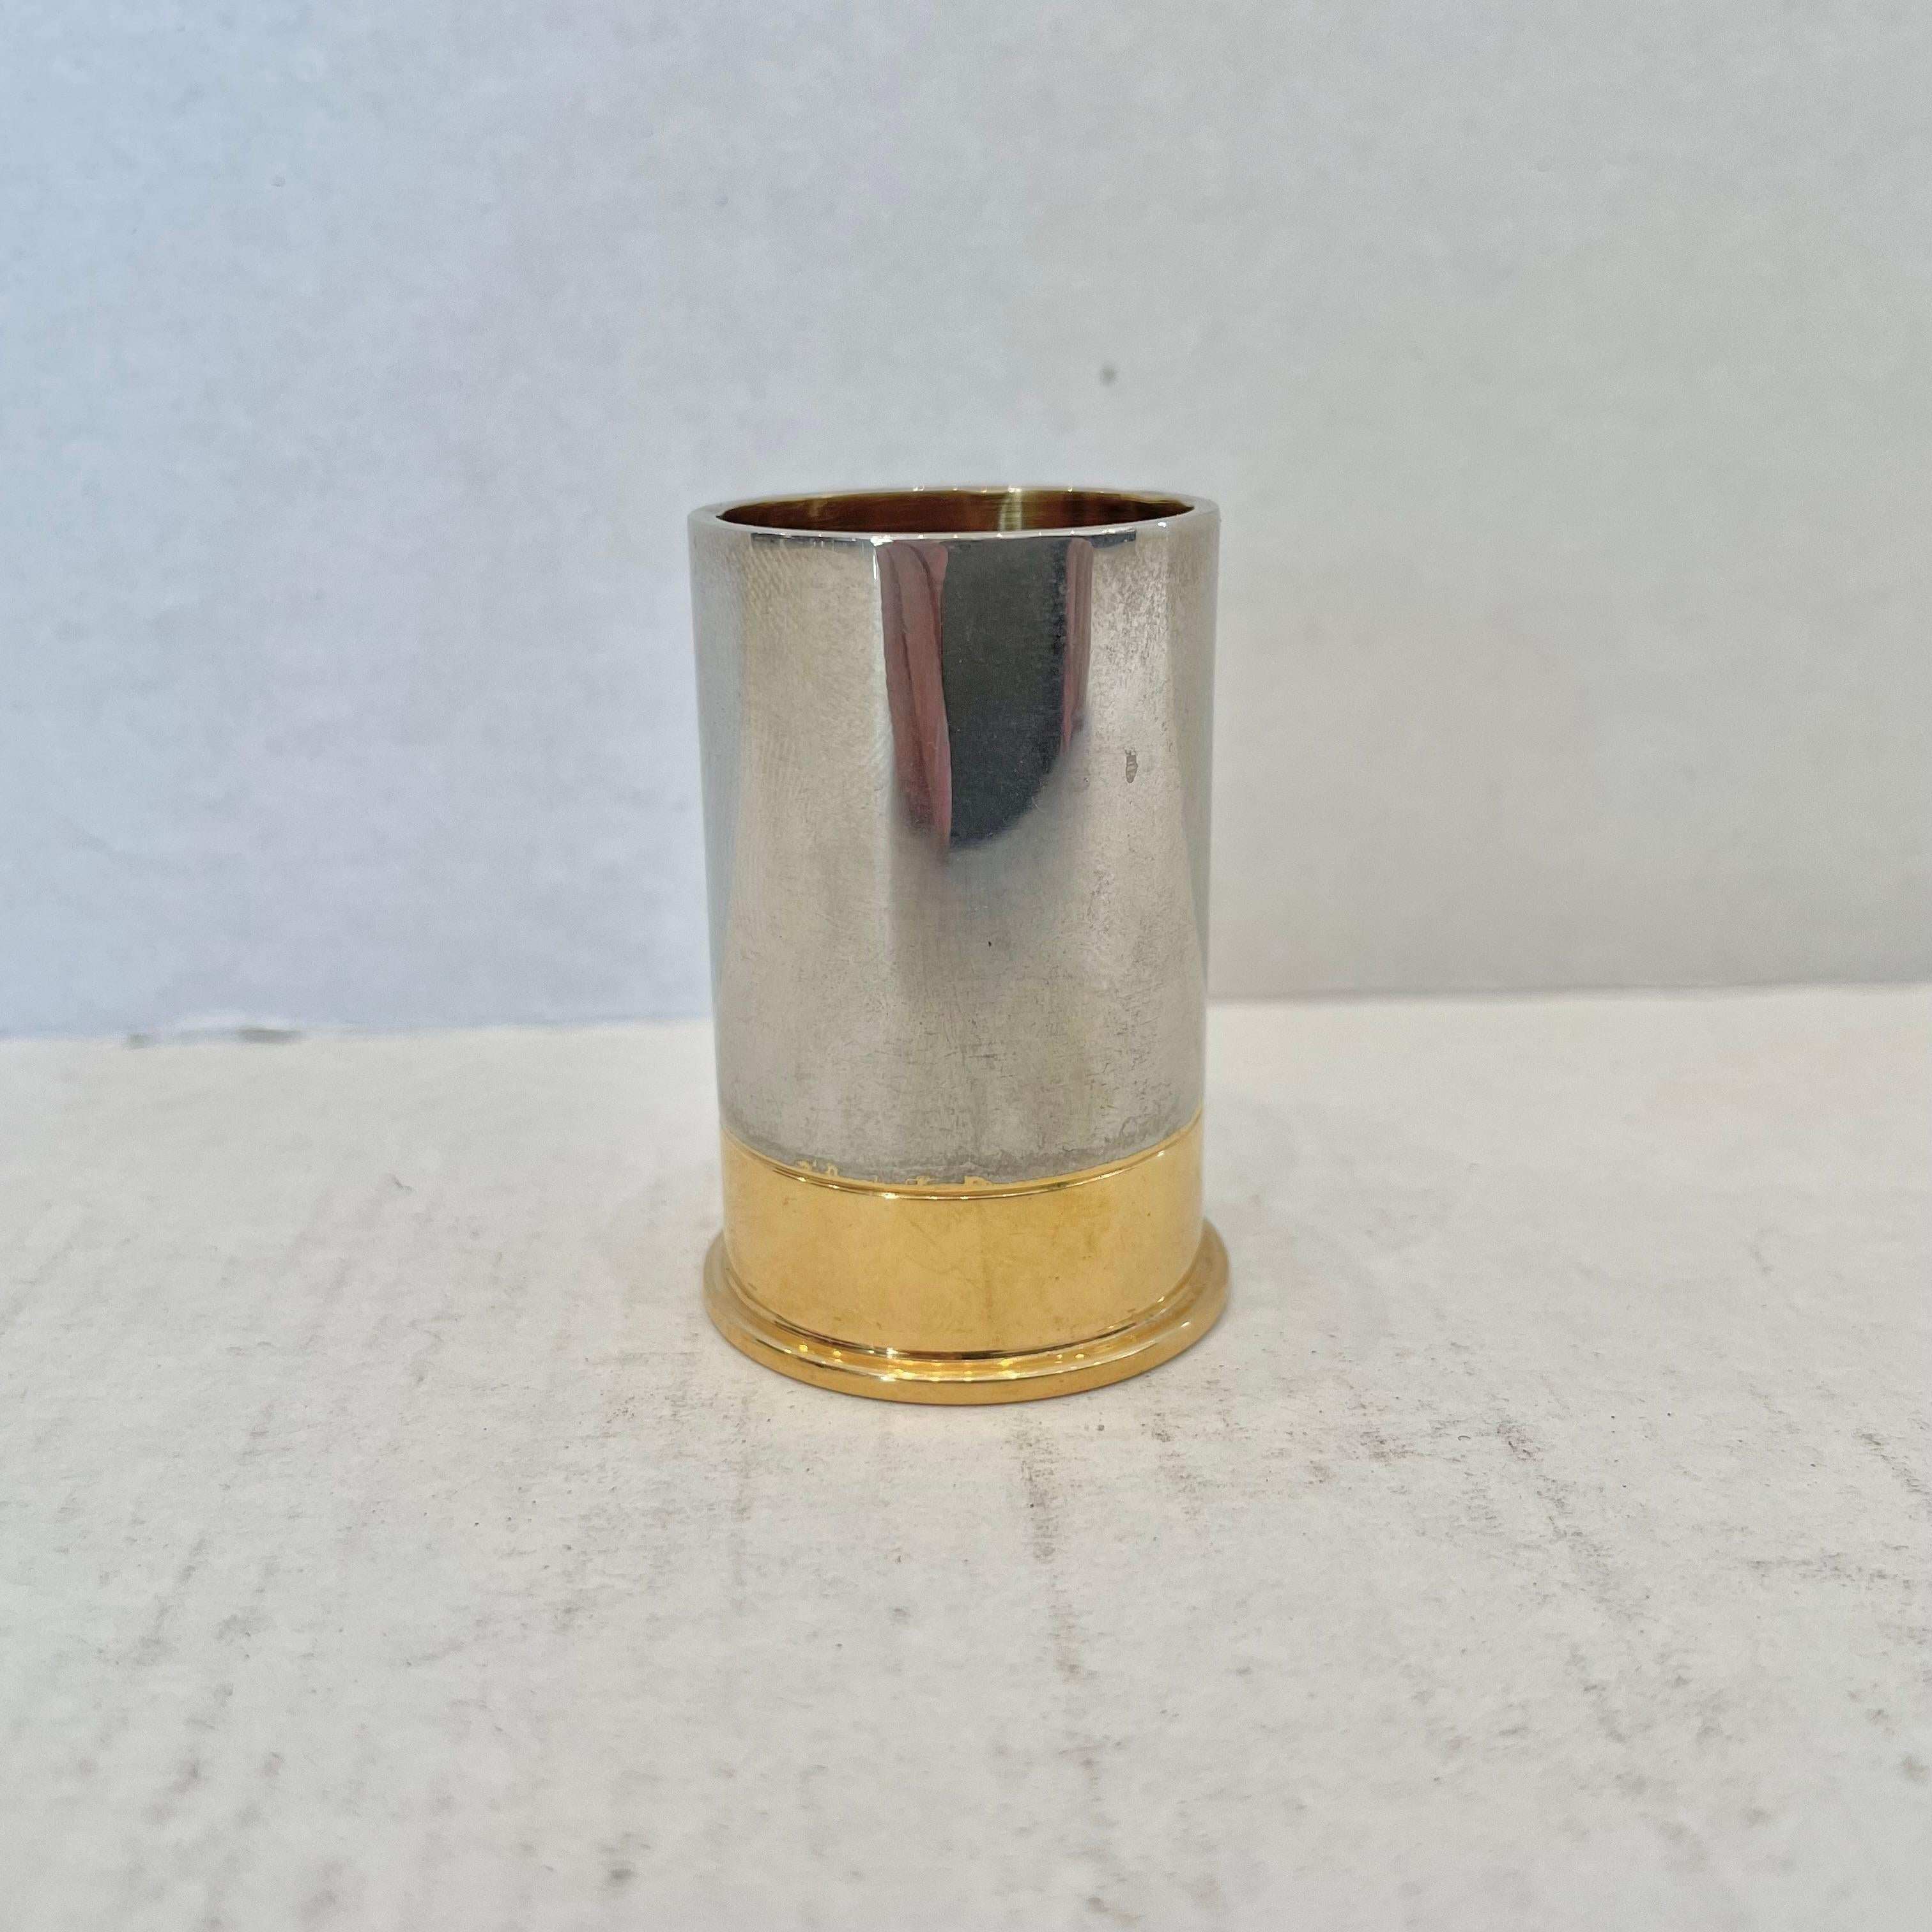 Classic silver cup with brass bottom made by Hermès. In the shape/style of a shotgun shell. Stamped Hermès Made in France on underside of brass. Good vintage condition. Great desktop item with functionality and fun design.